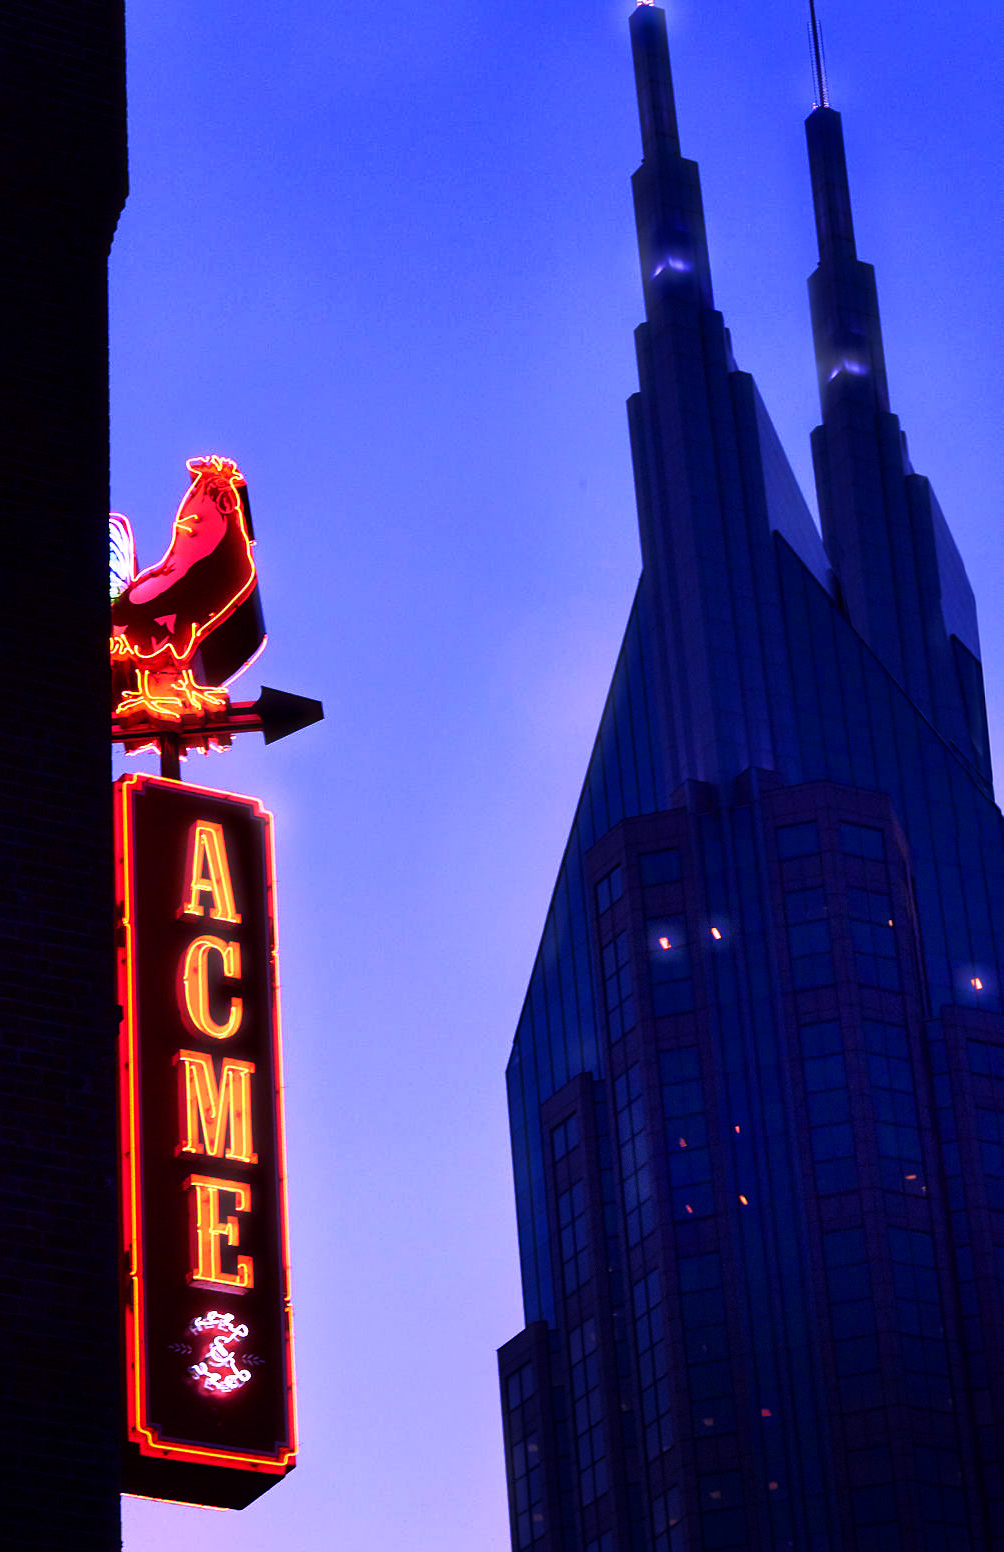 ACME Feed and Seed signage restaurant in Nashville with AT&T Batman building